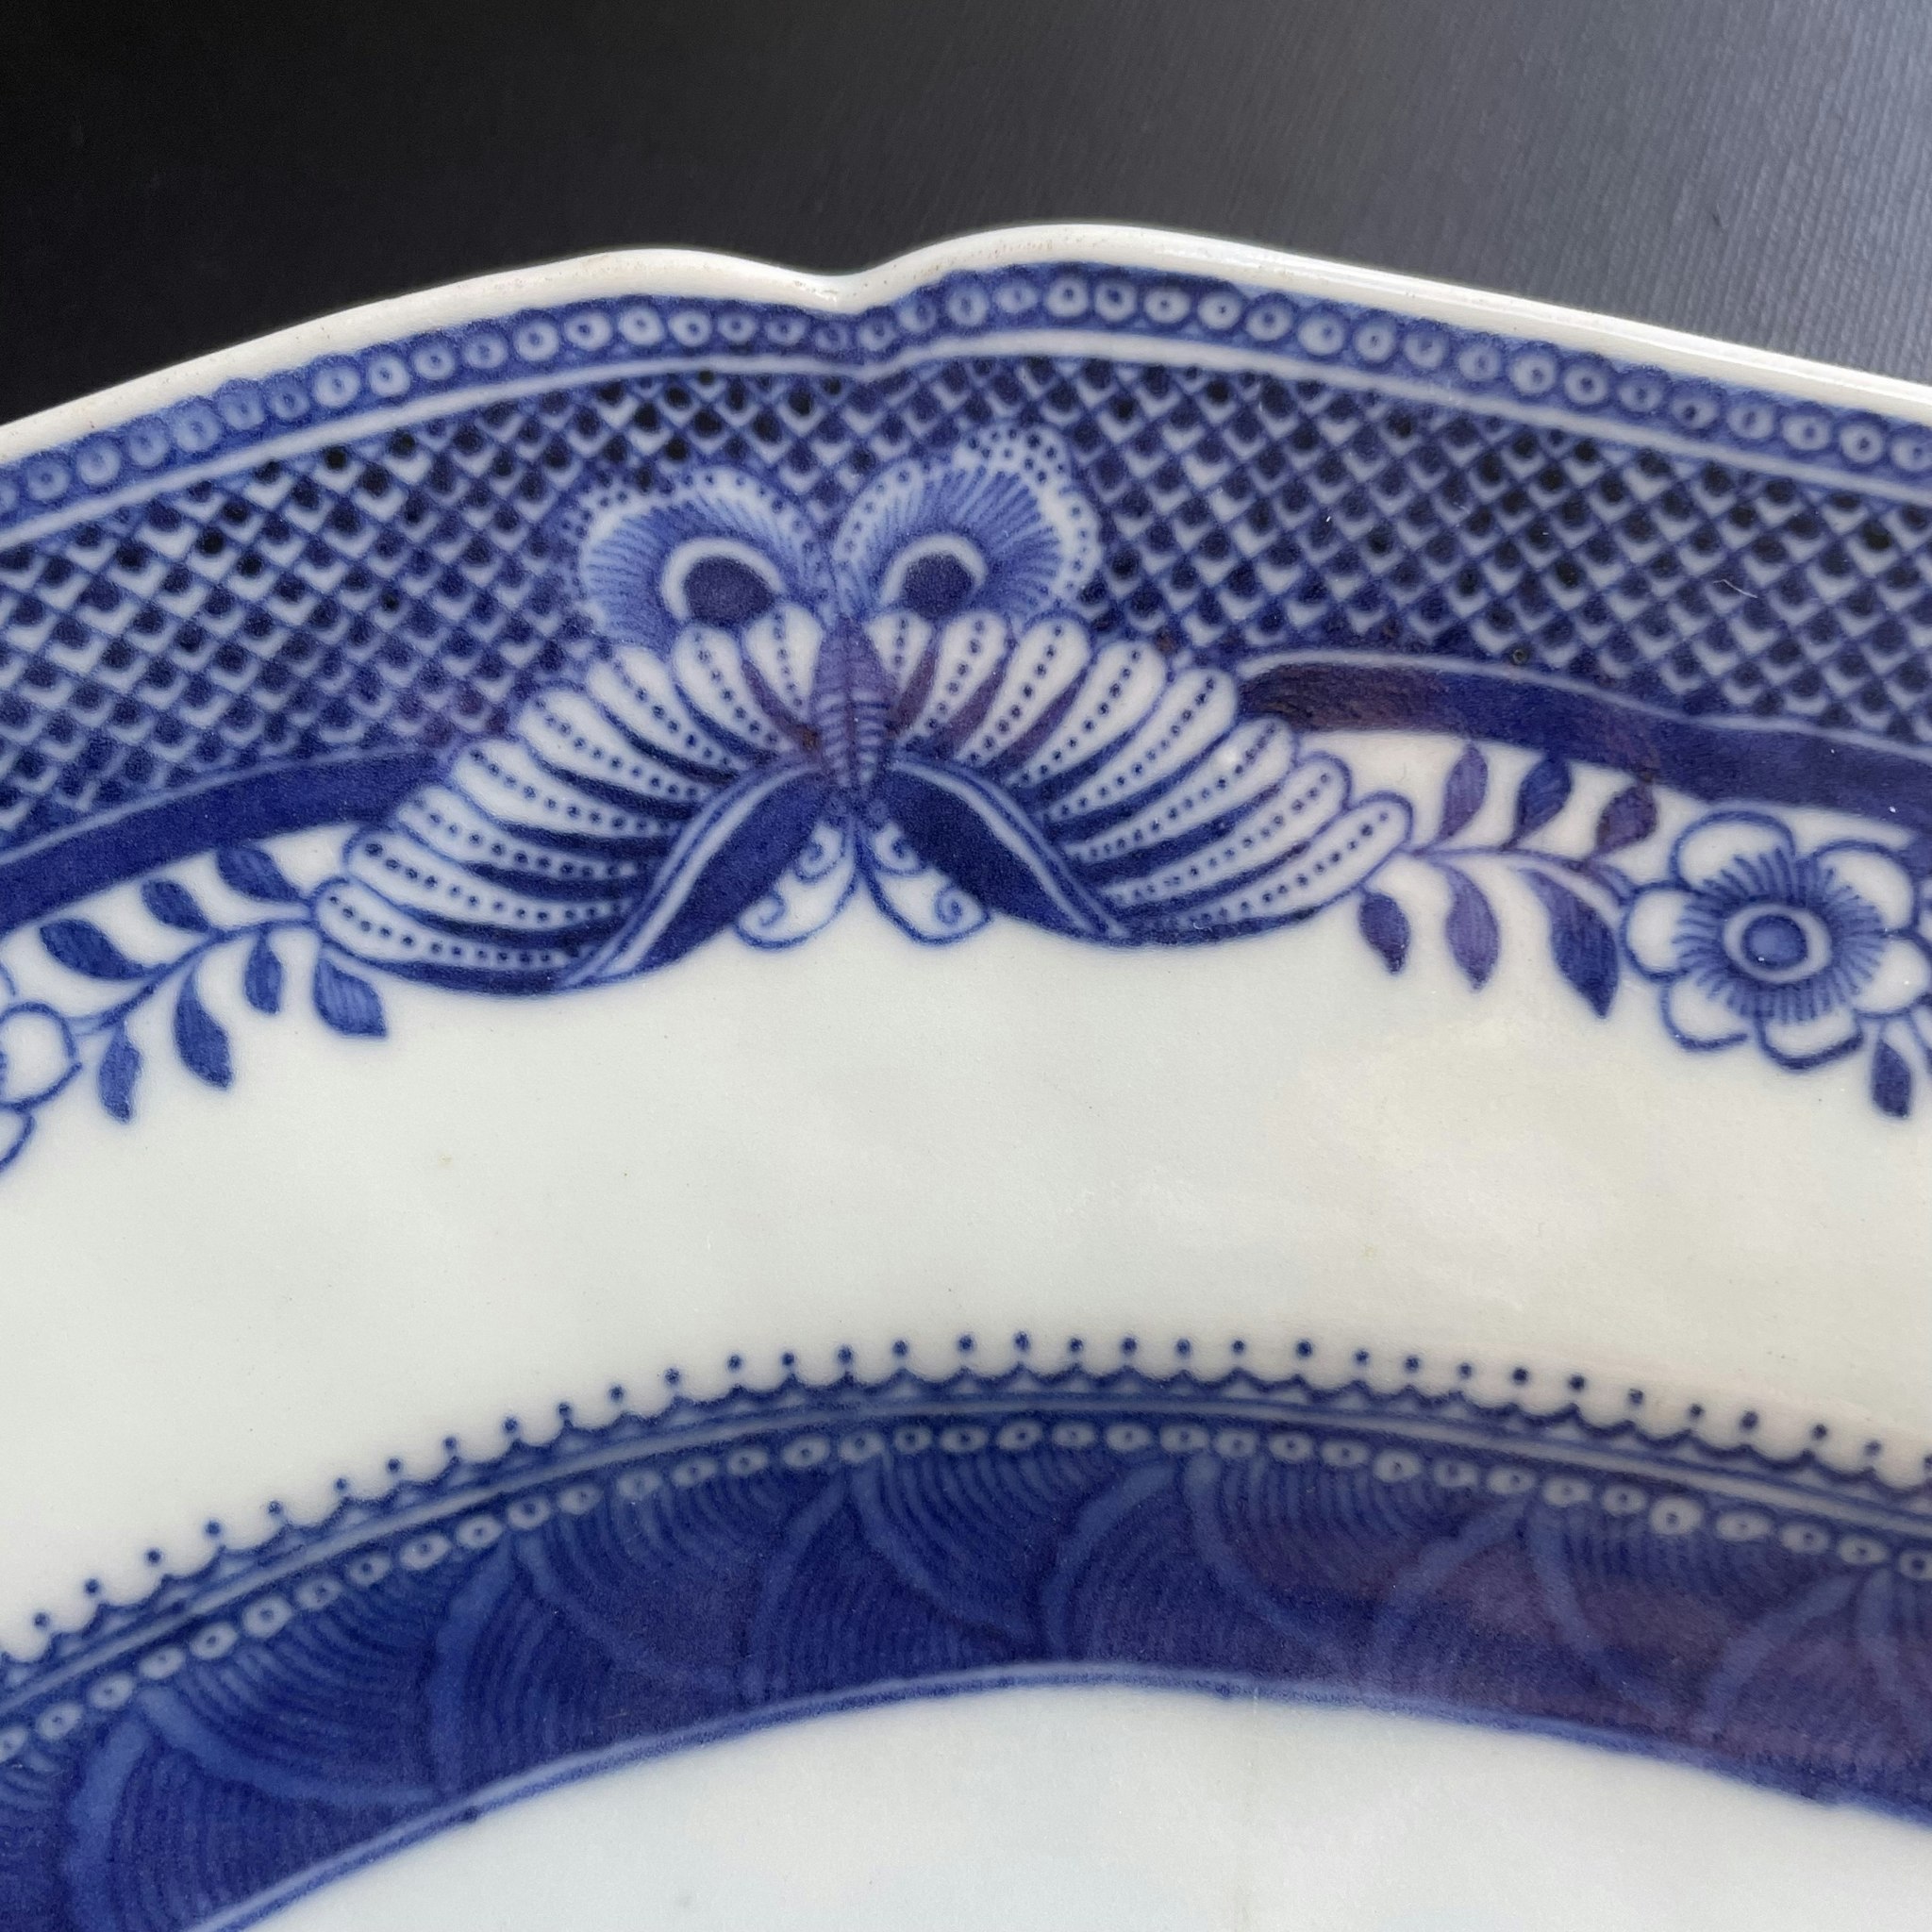 Chinese antique underglazed blue and white platter, Qianlong Period #1126